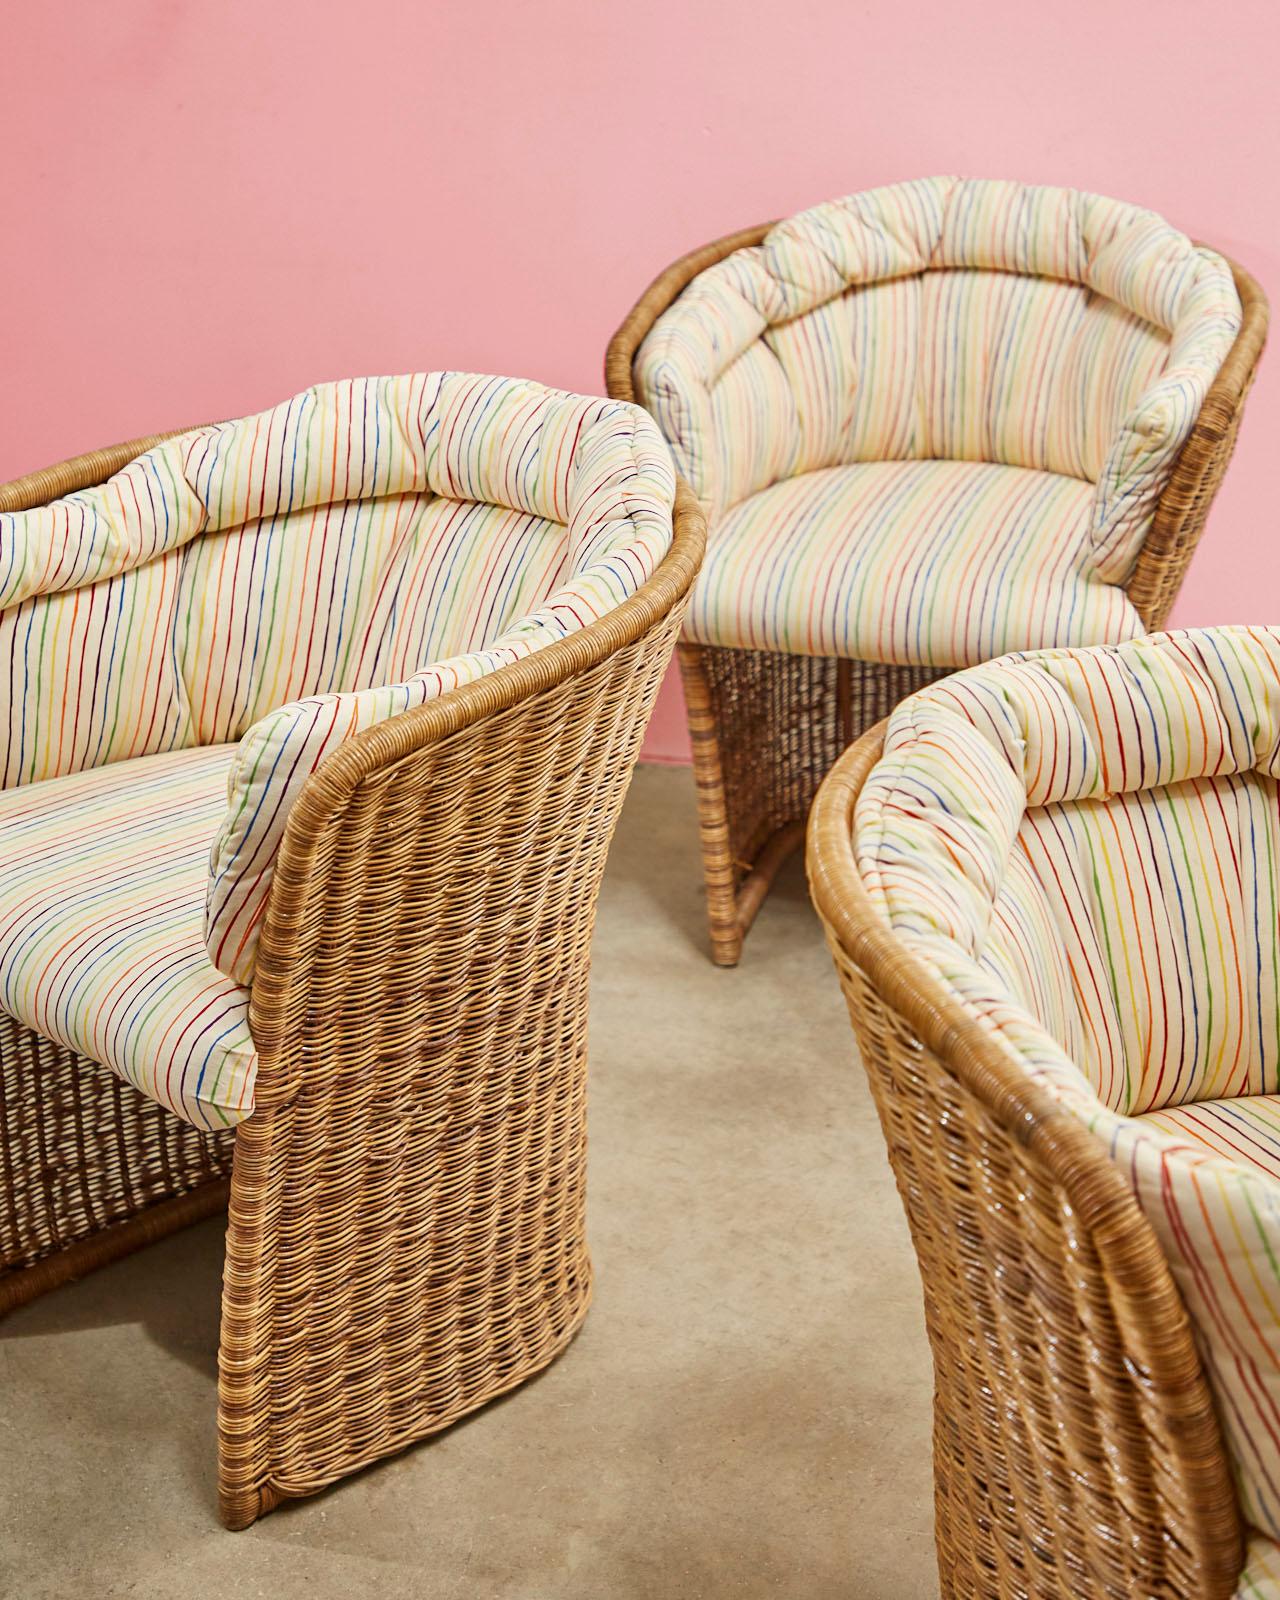 Stylish set of 20th century wicker lounge chairs made in the organic modern style. Featuring a wicker covered frame having a tulip form with a barrel back and a tapered bottom. Unique chairs with padded cushions decorated with a colorful striped